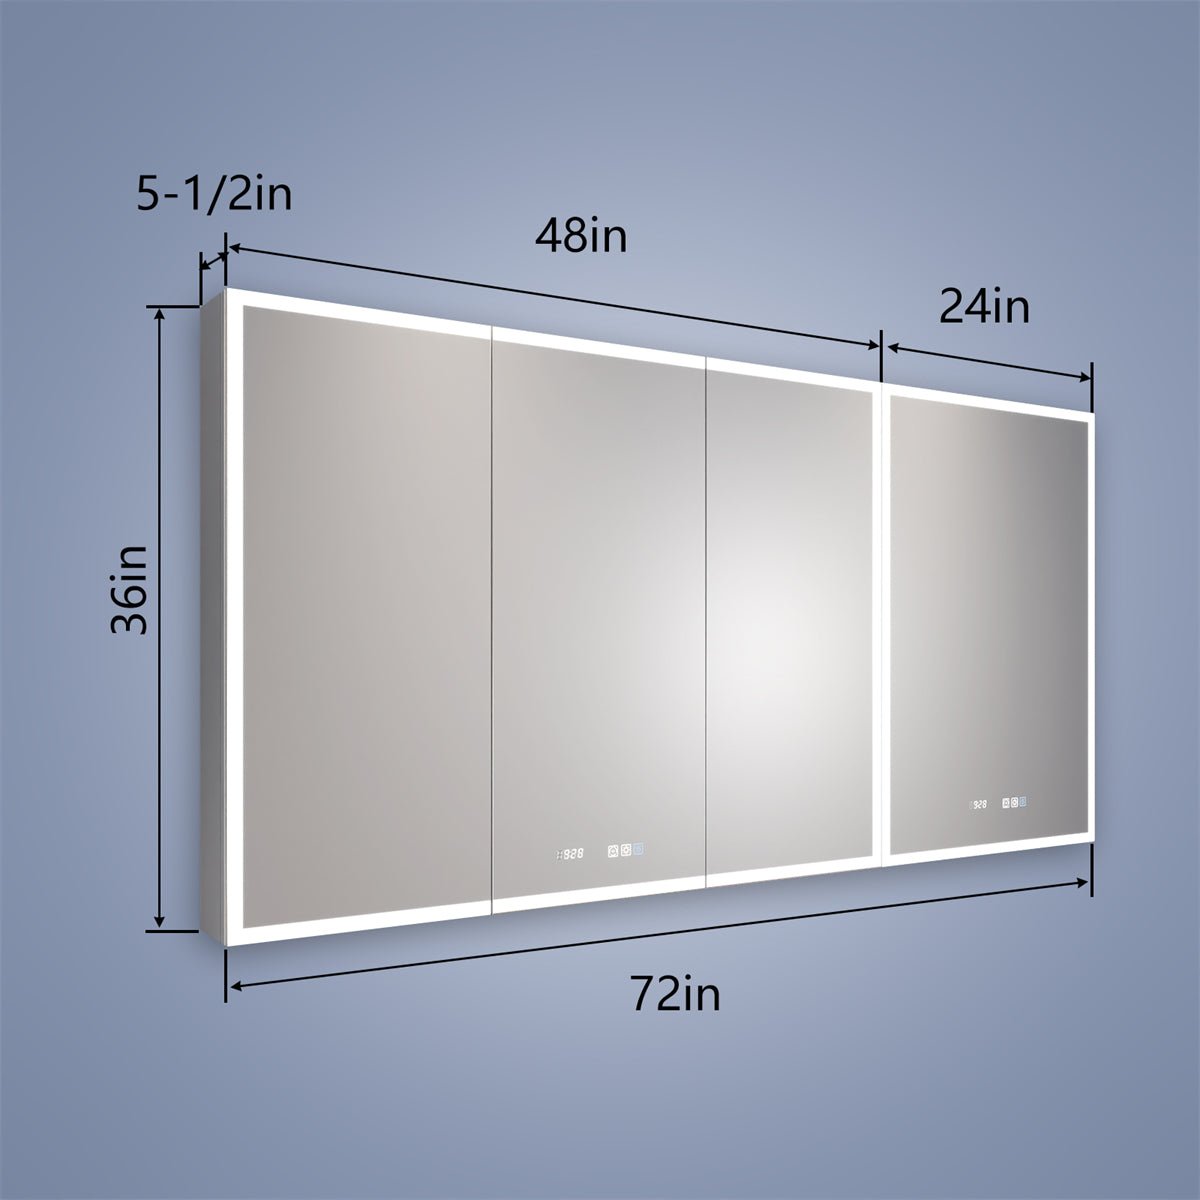 Rim 72" W x 36" H Led Lighted Medicine Cabinet Recessed or Surface with Mirrors